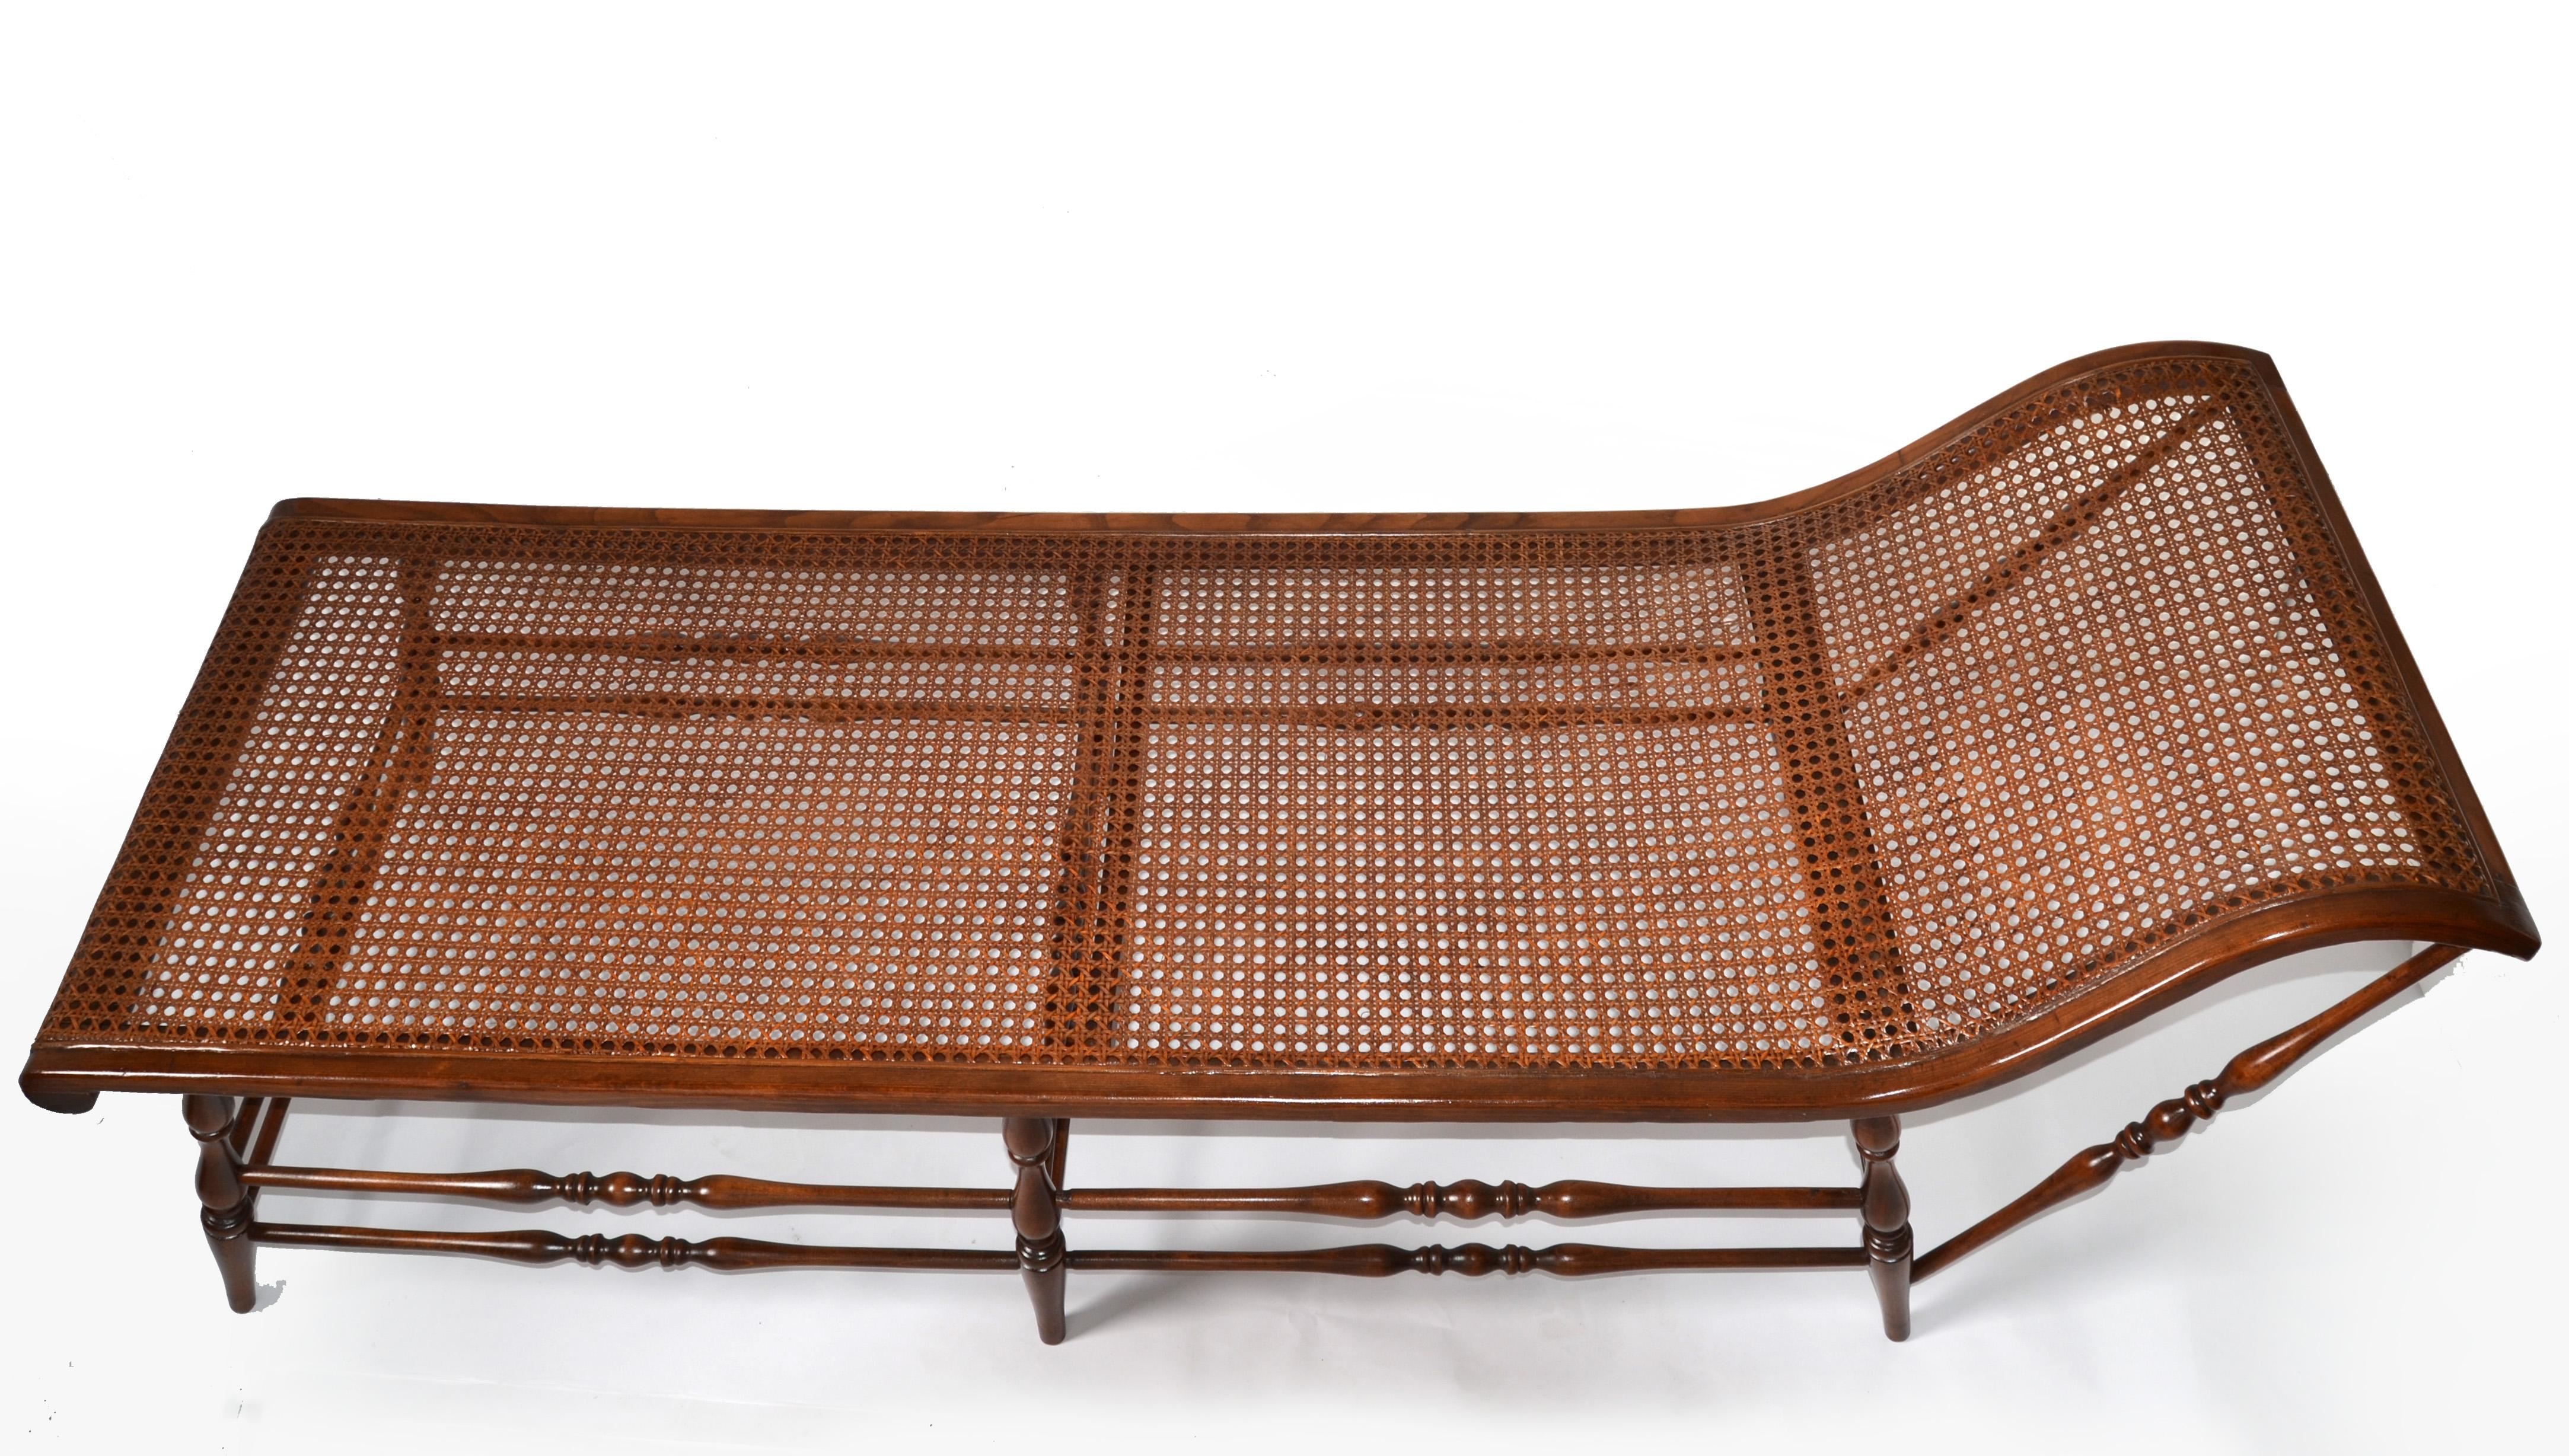 American British Colonial Handwoven Cane Turned Wood Spindle Frame Chaise Lounge Daybed For Sale